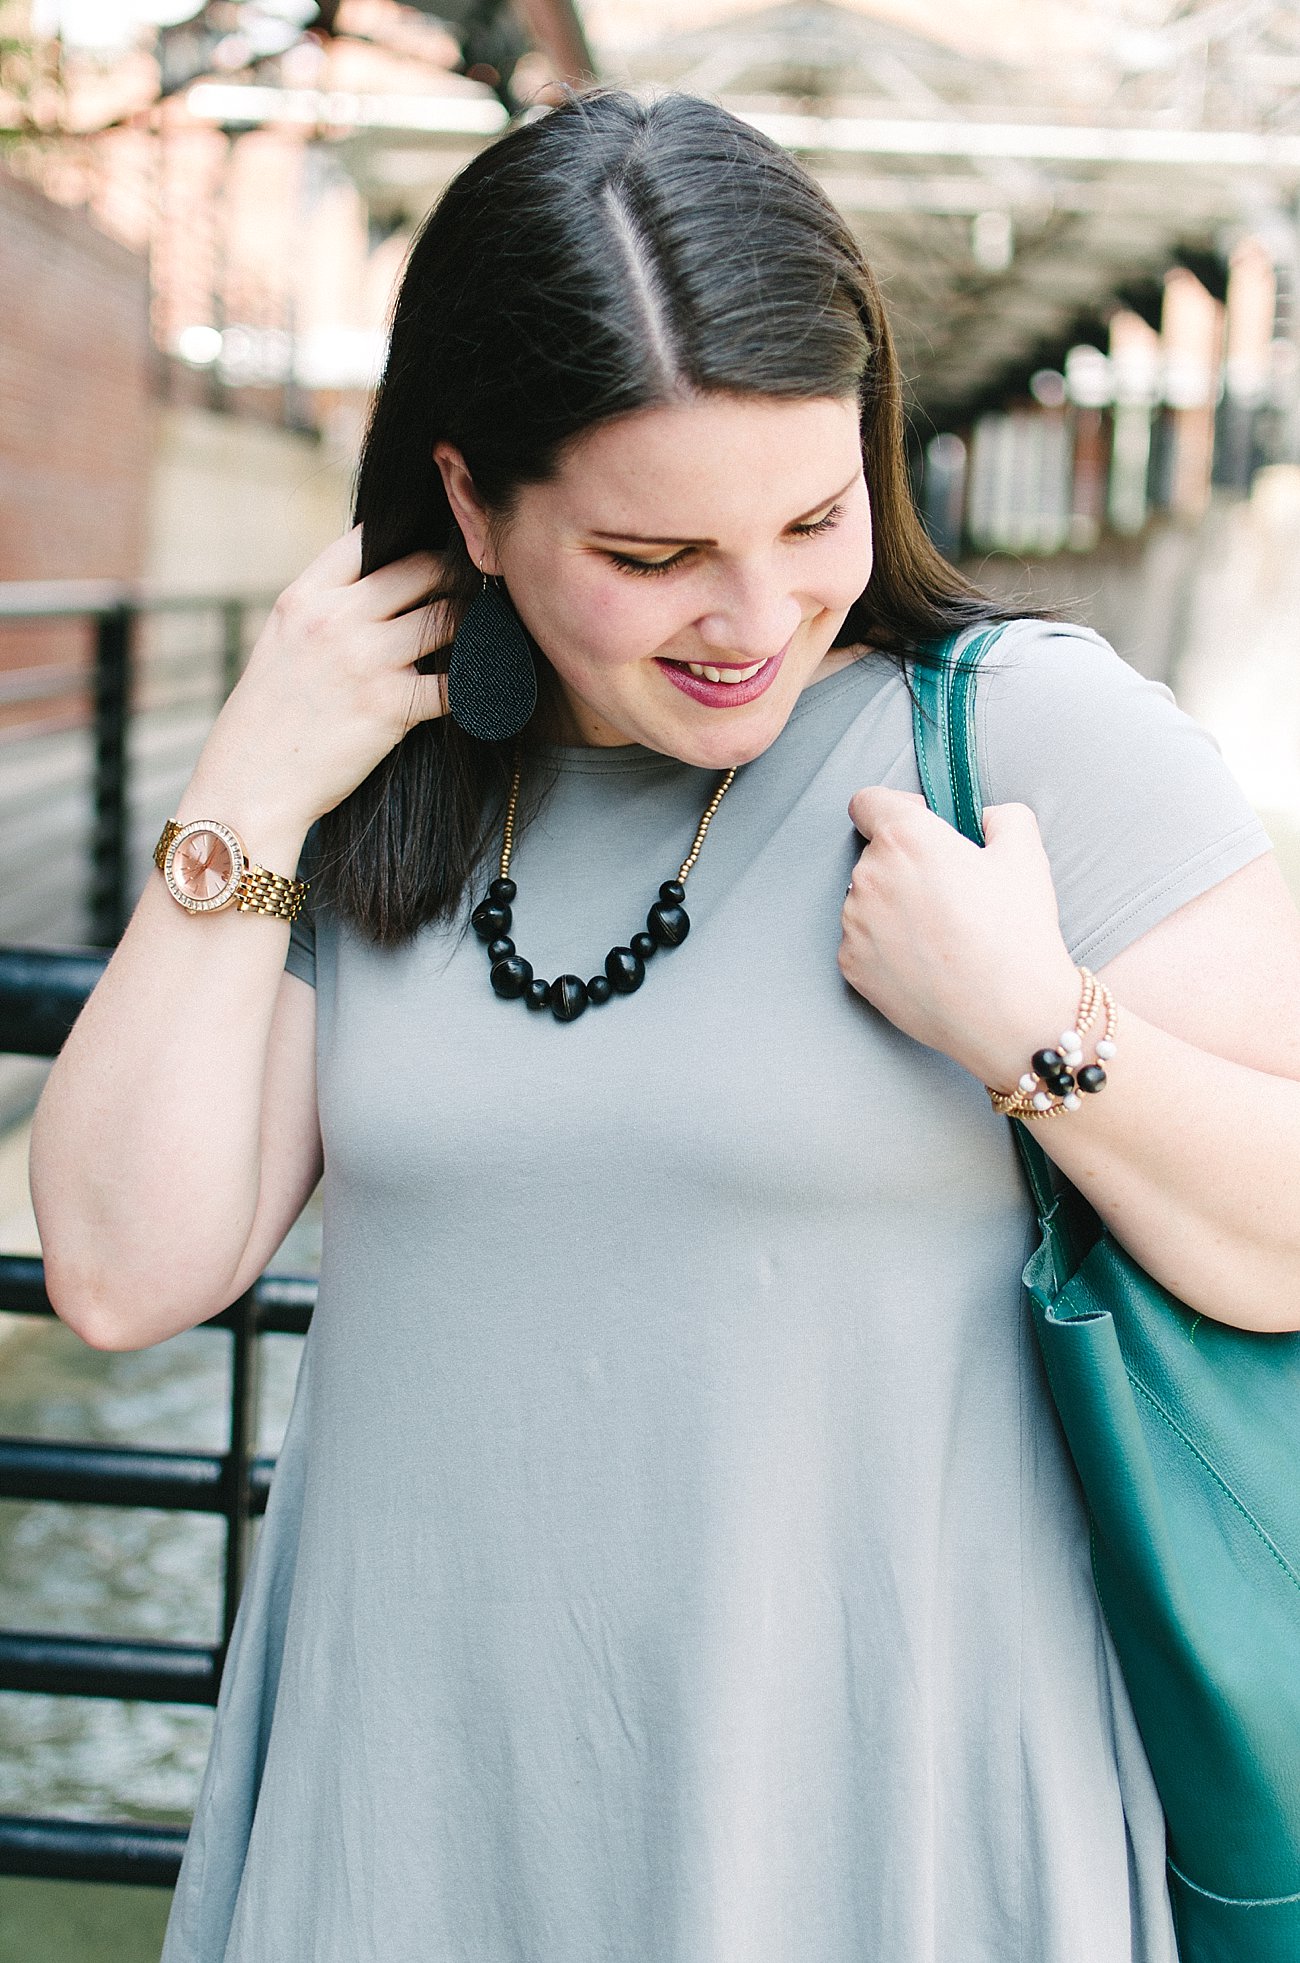 The Erla Fair Trade Dress is Your New Favorite Dress by fashion blogger Still Being Molly